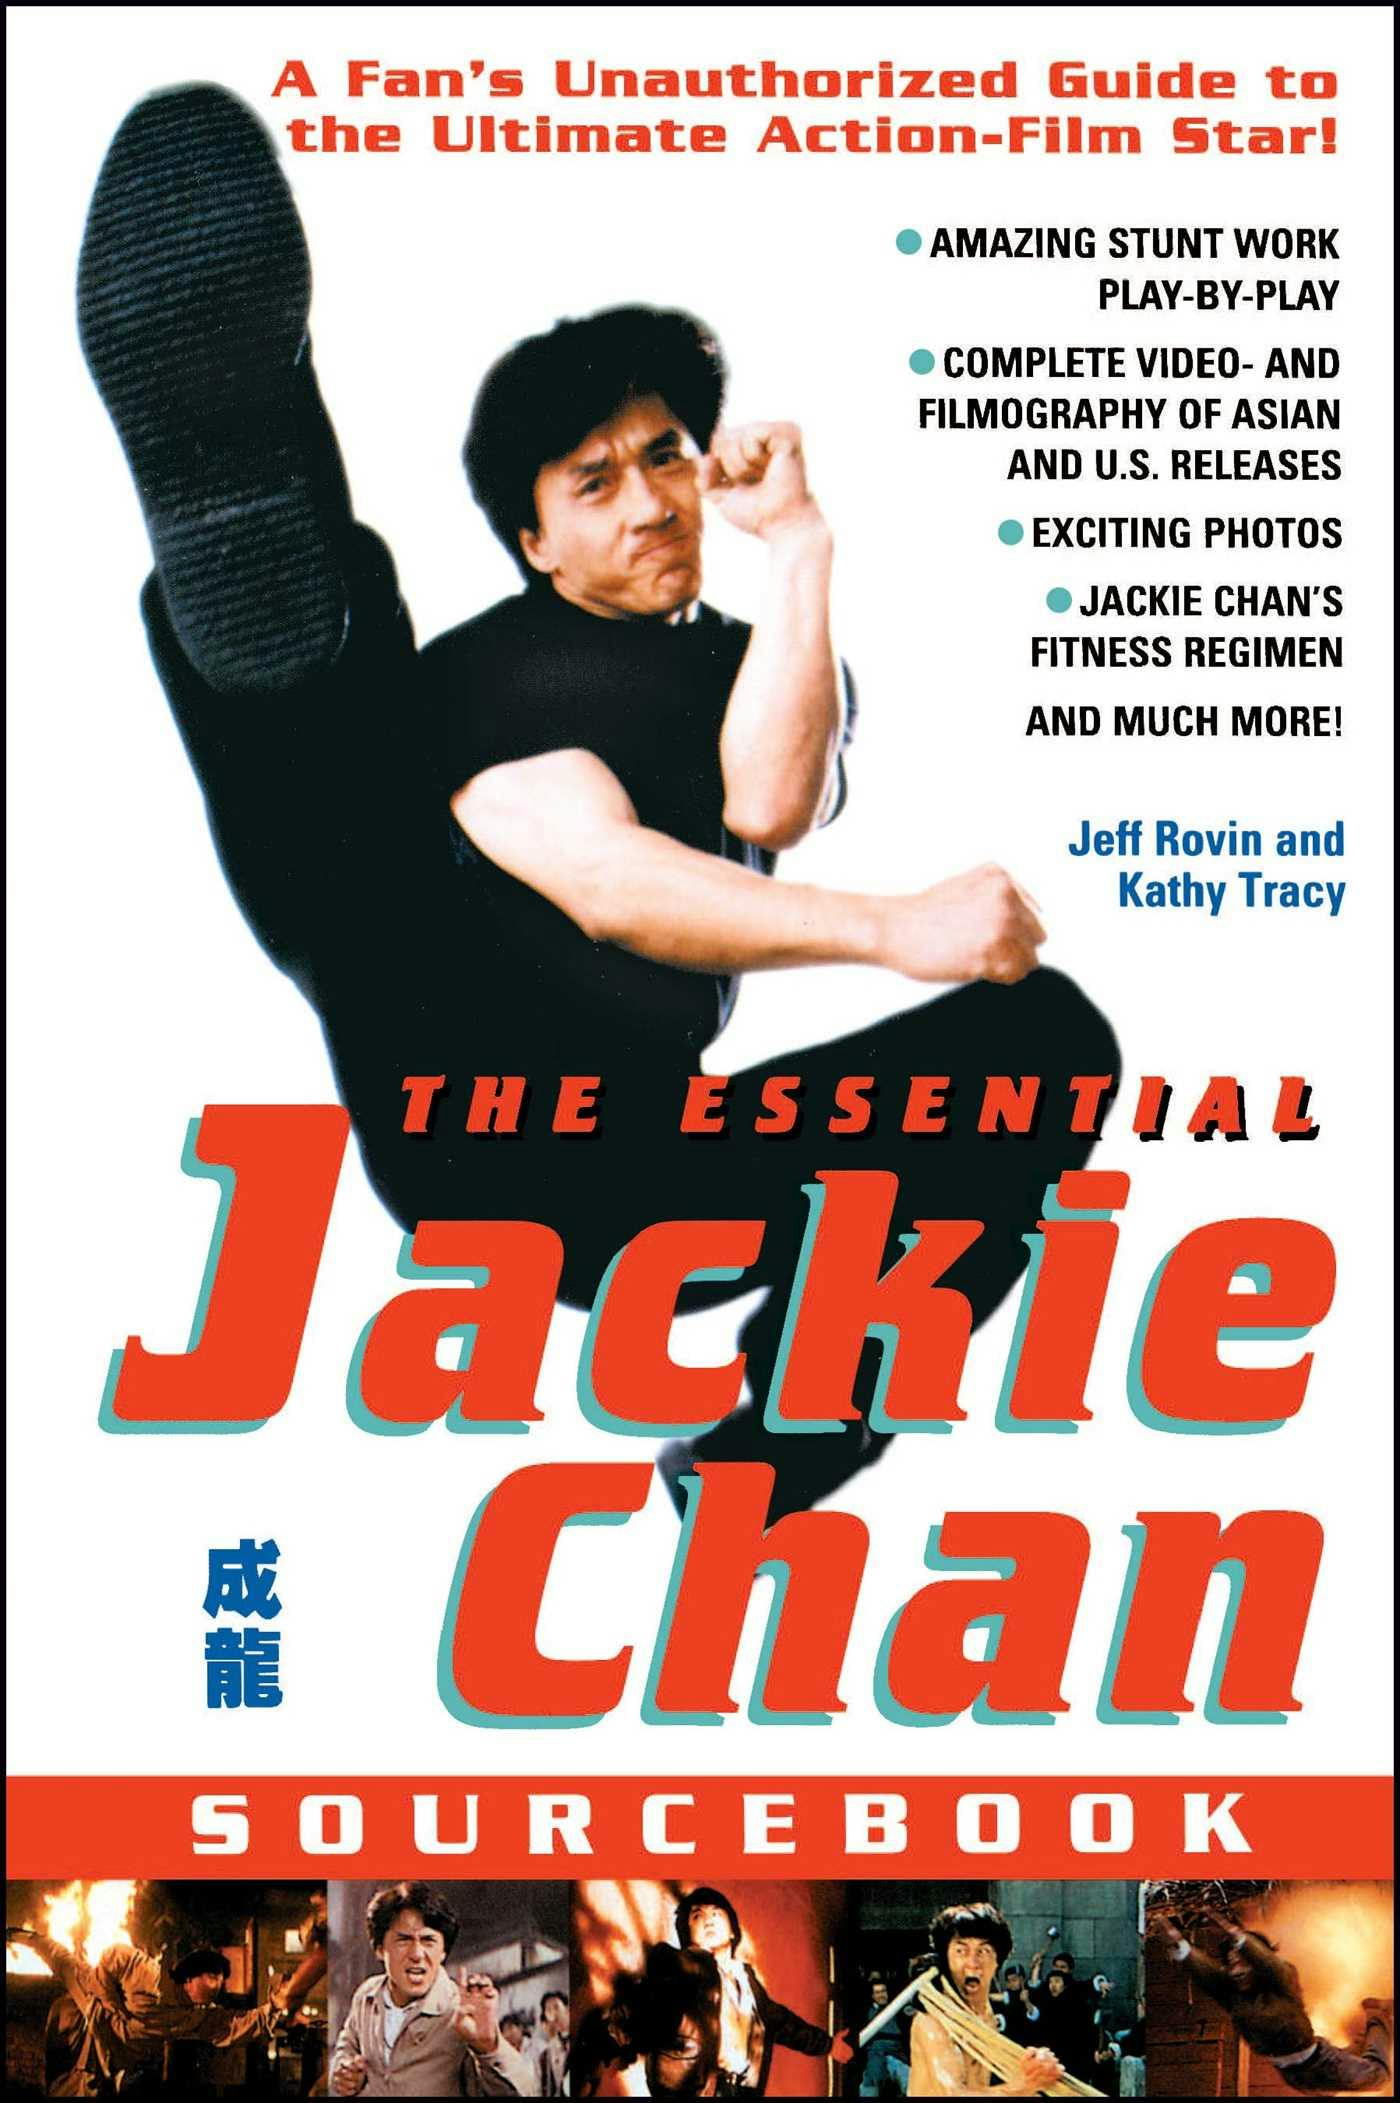 The Essential Jackie Chan Source Book - Jeff Rovin